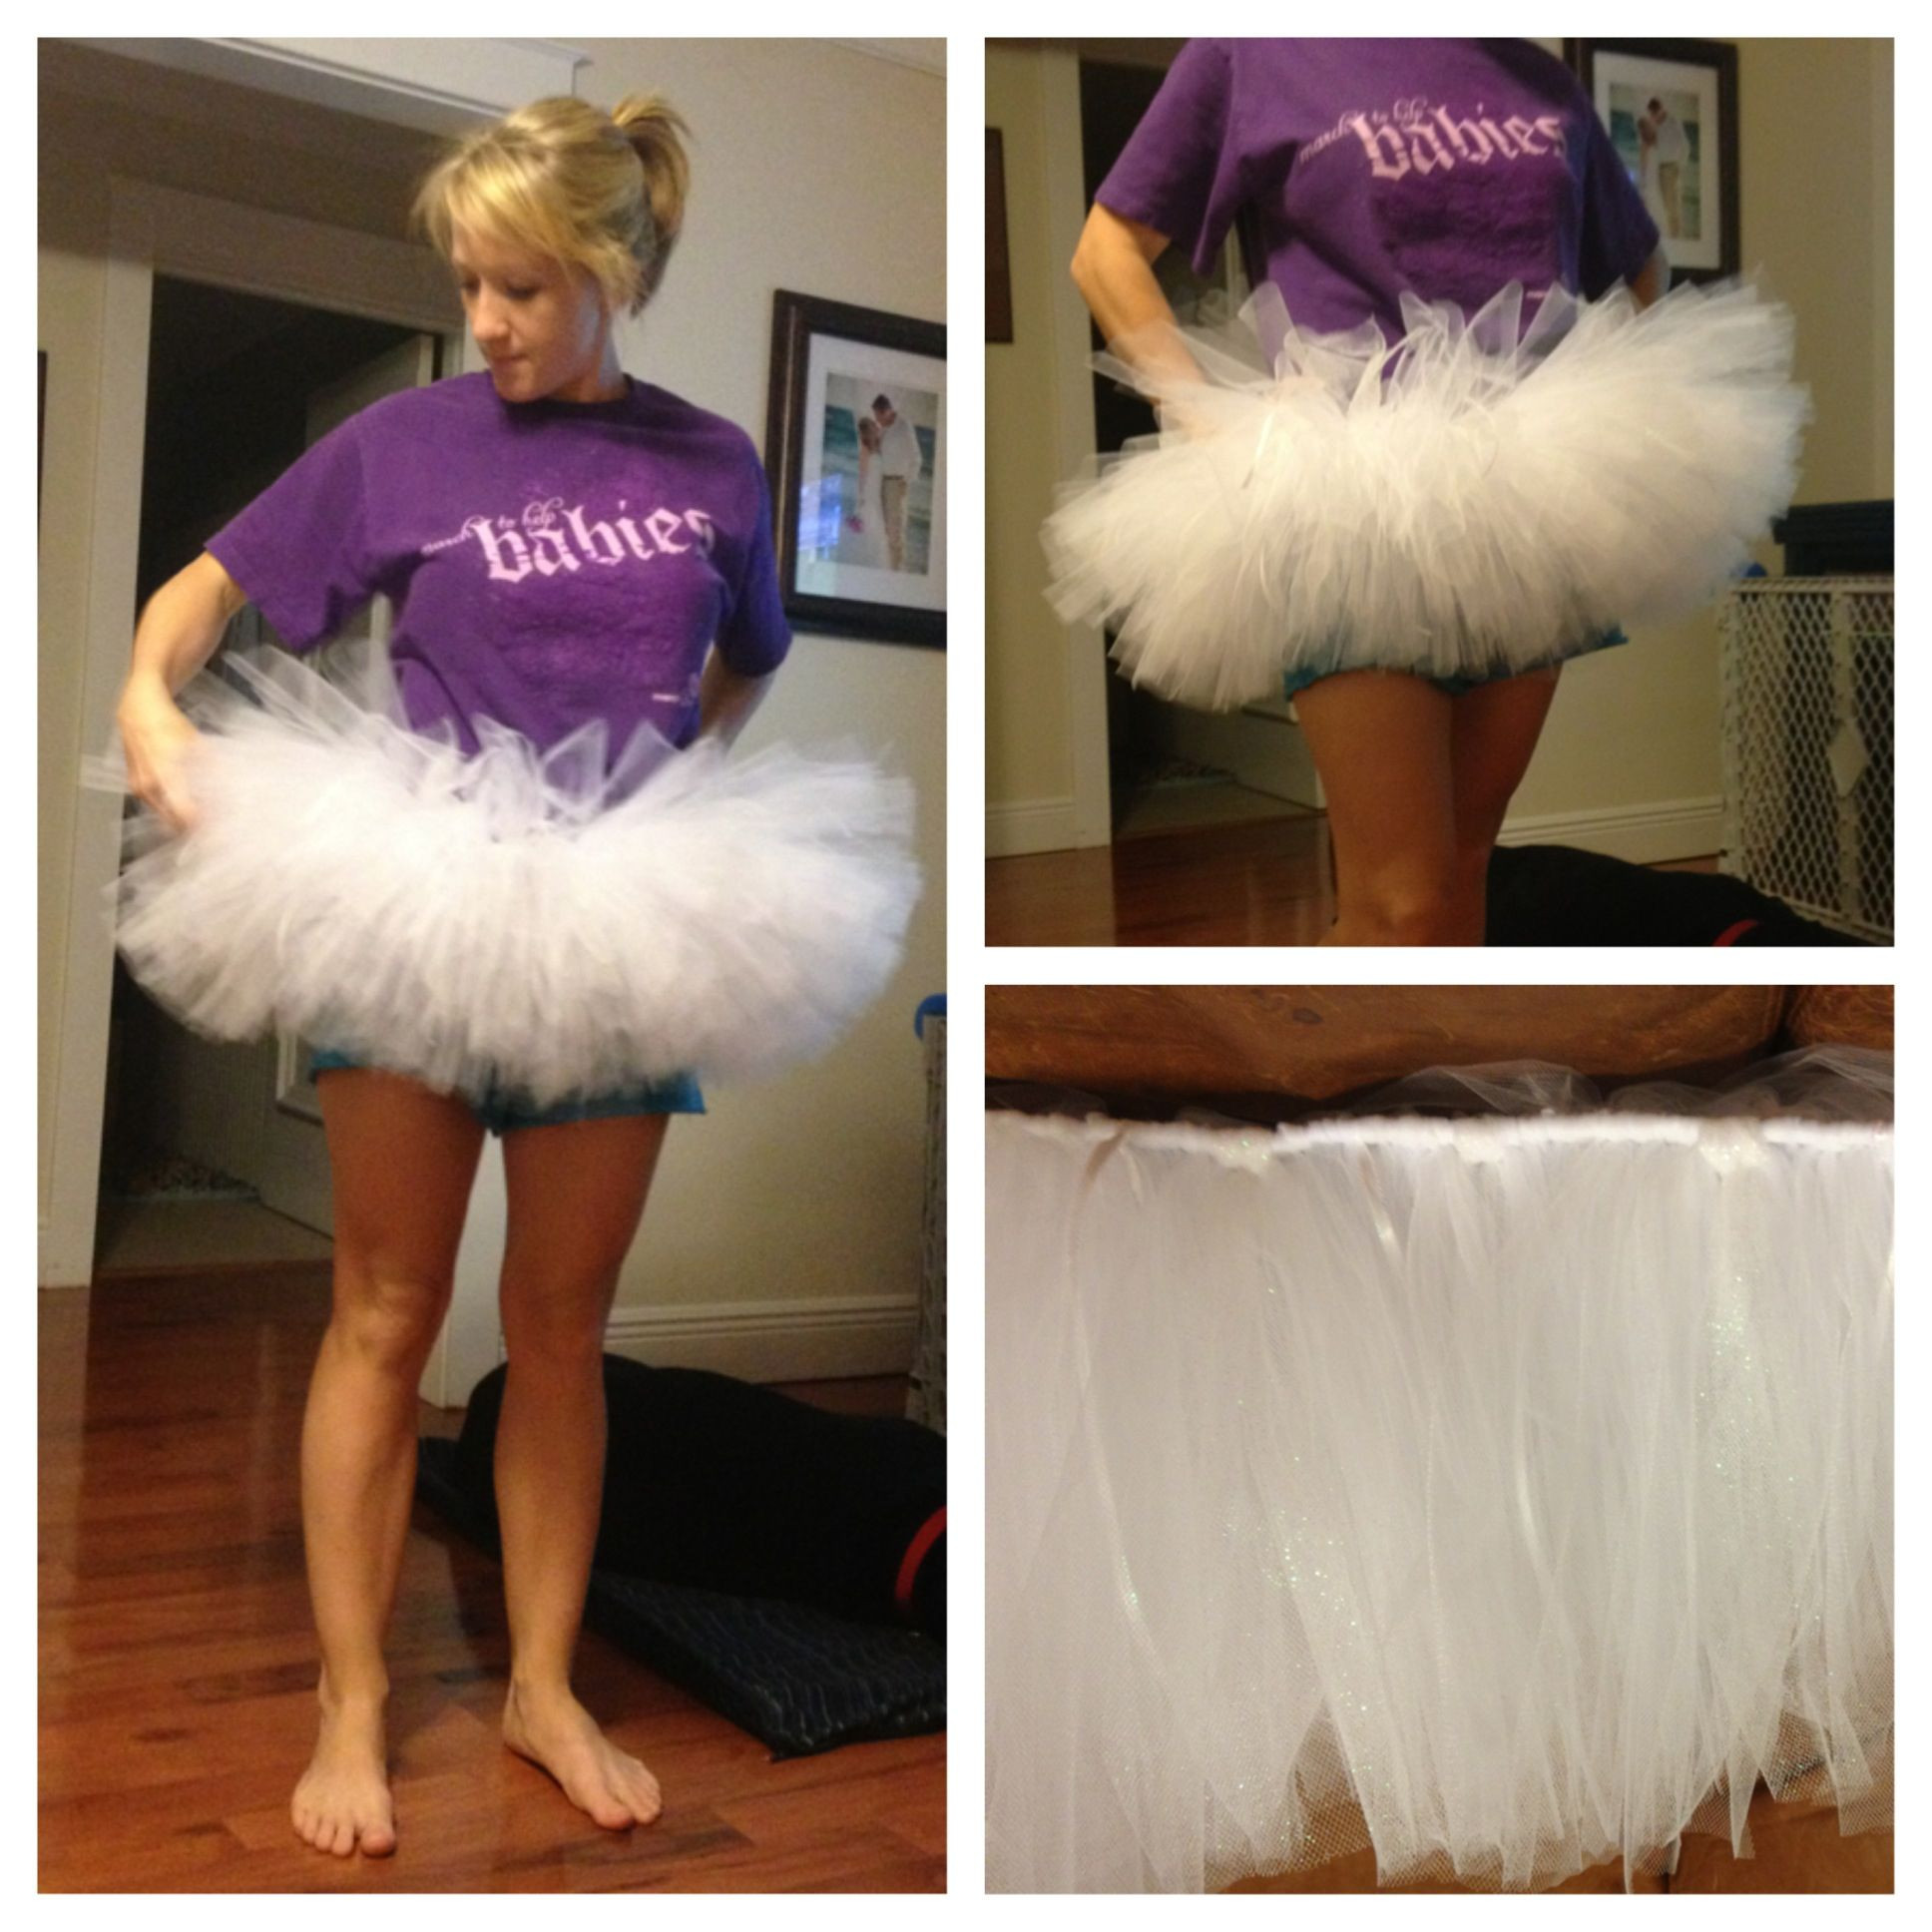 DIY Tutus For Adults
 My no sew adult sized tutu for The Color Run in a few